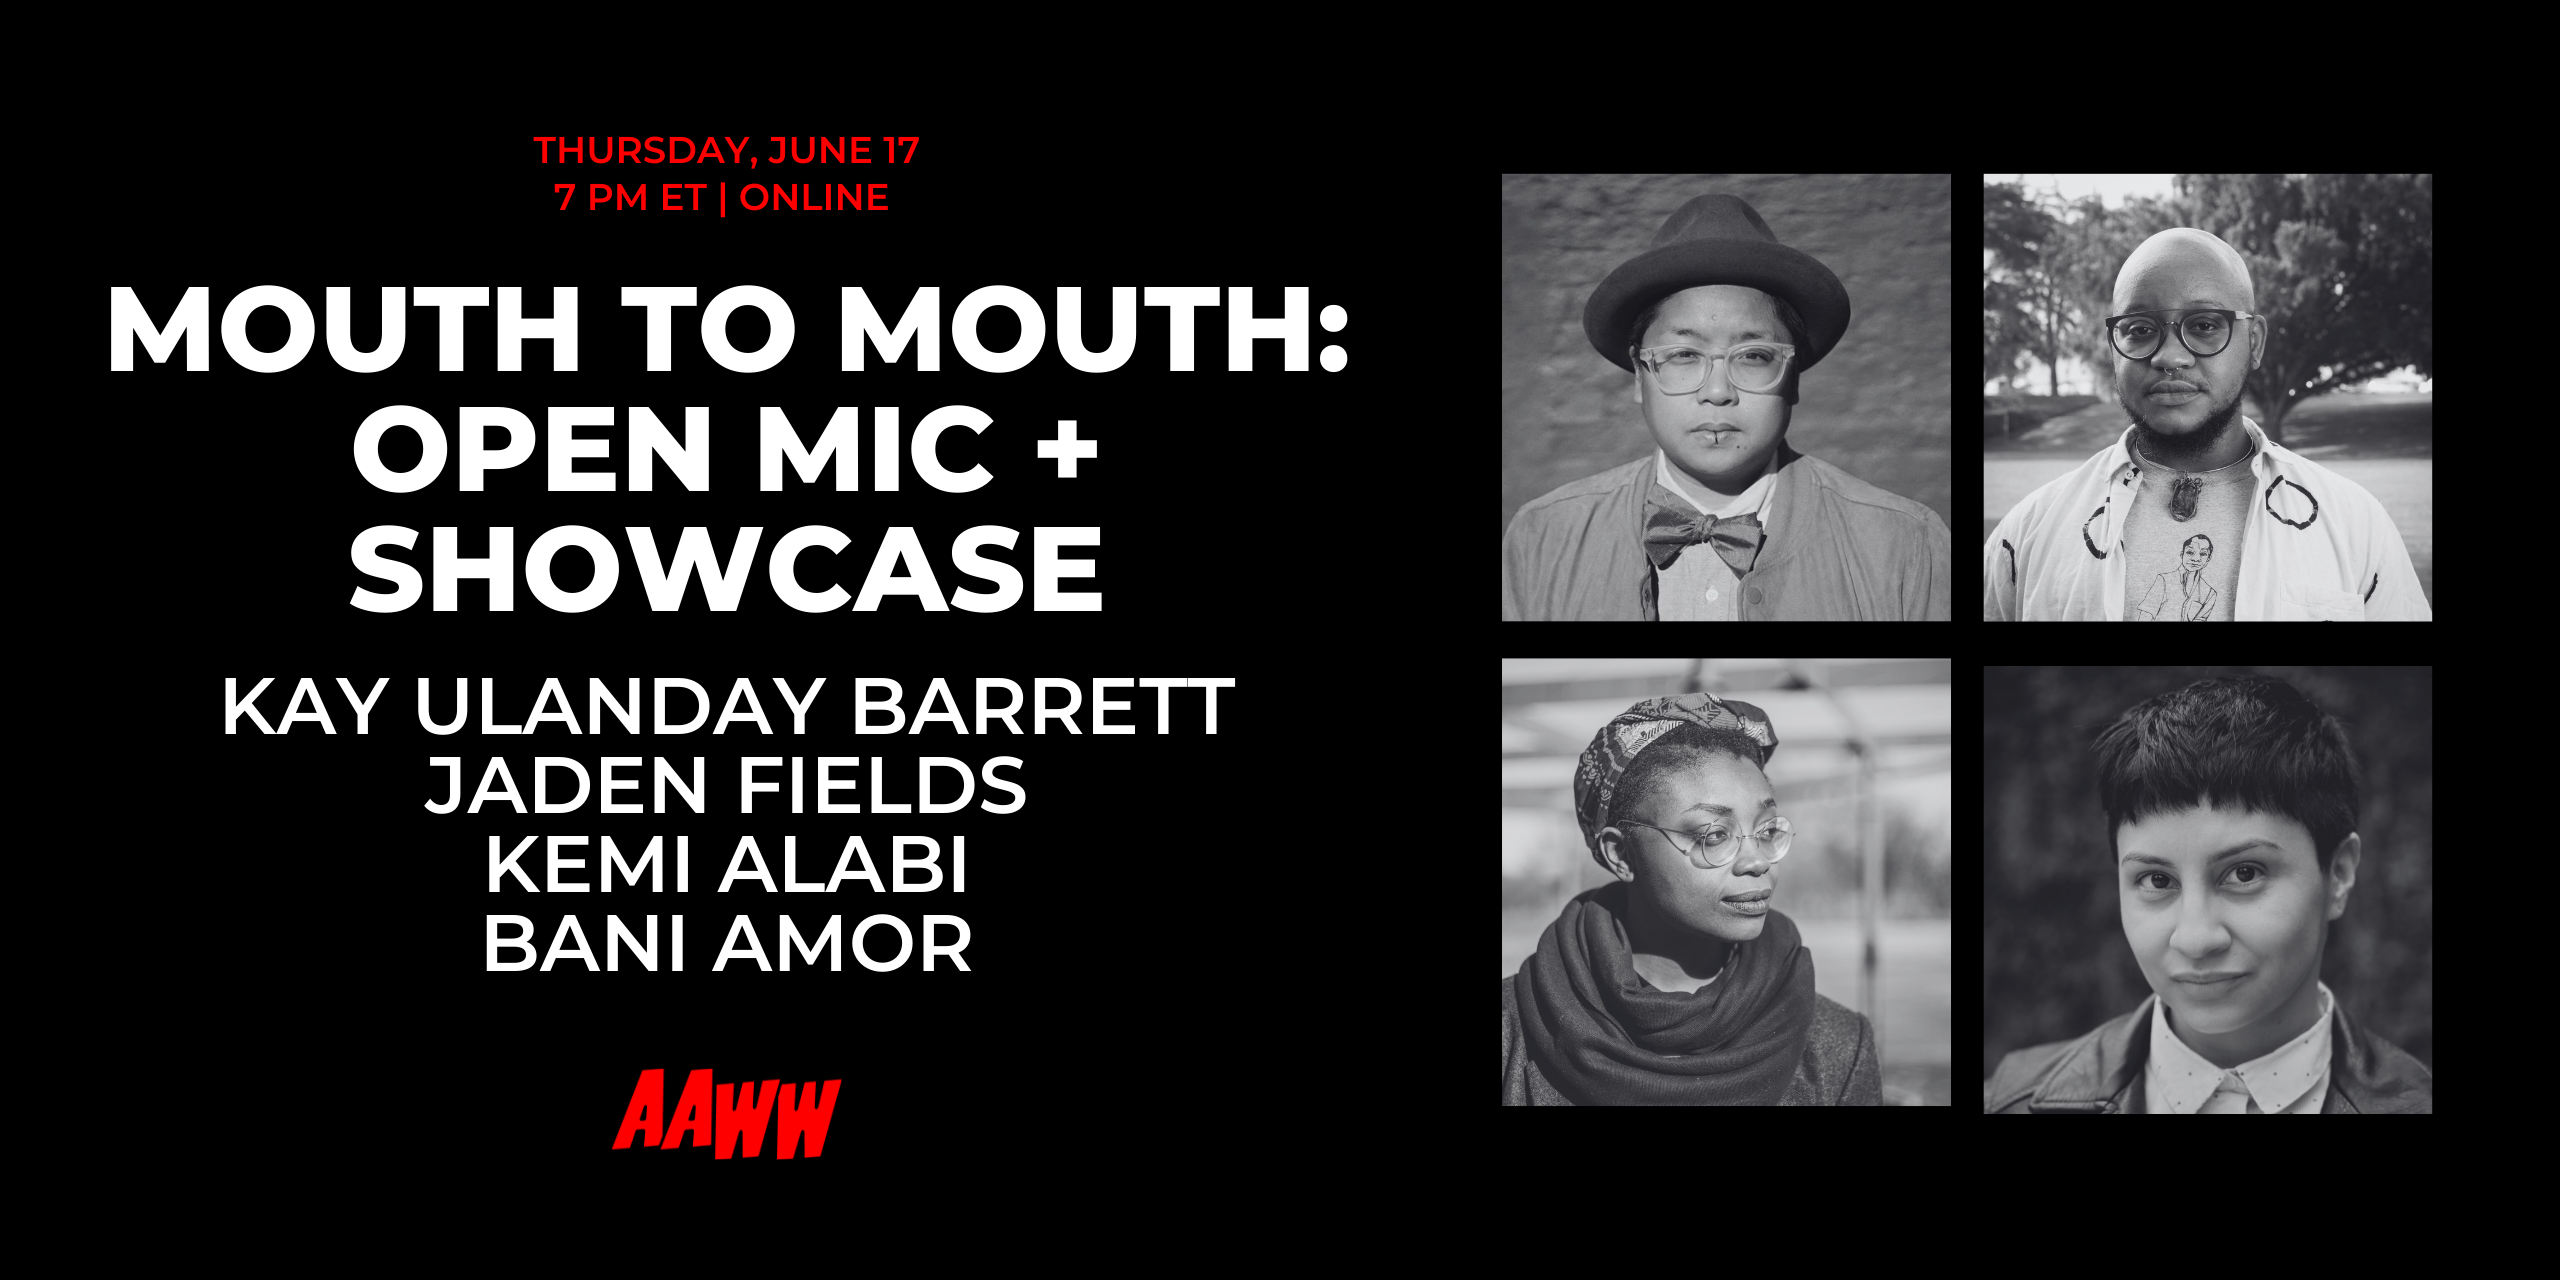 MOUTH TO MOUTH: OPEN MIC + SHOWCASE